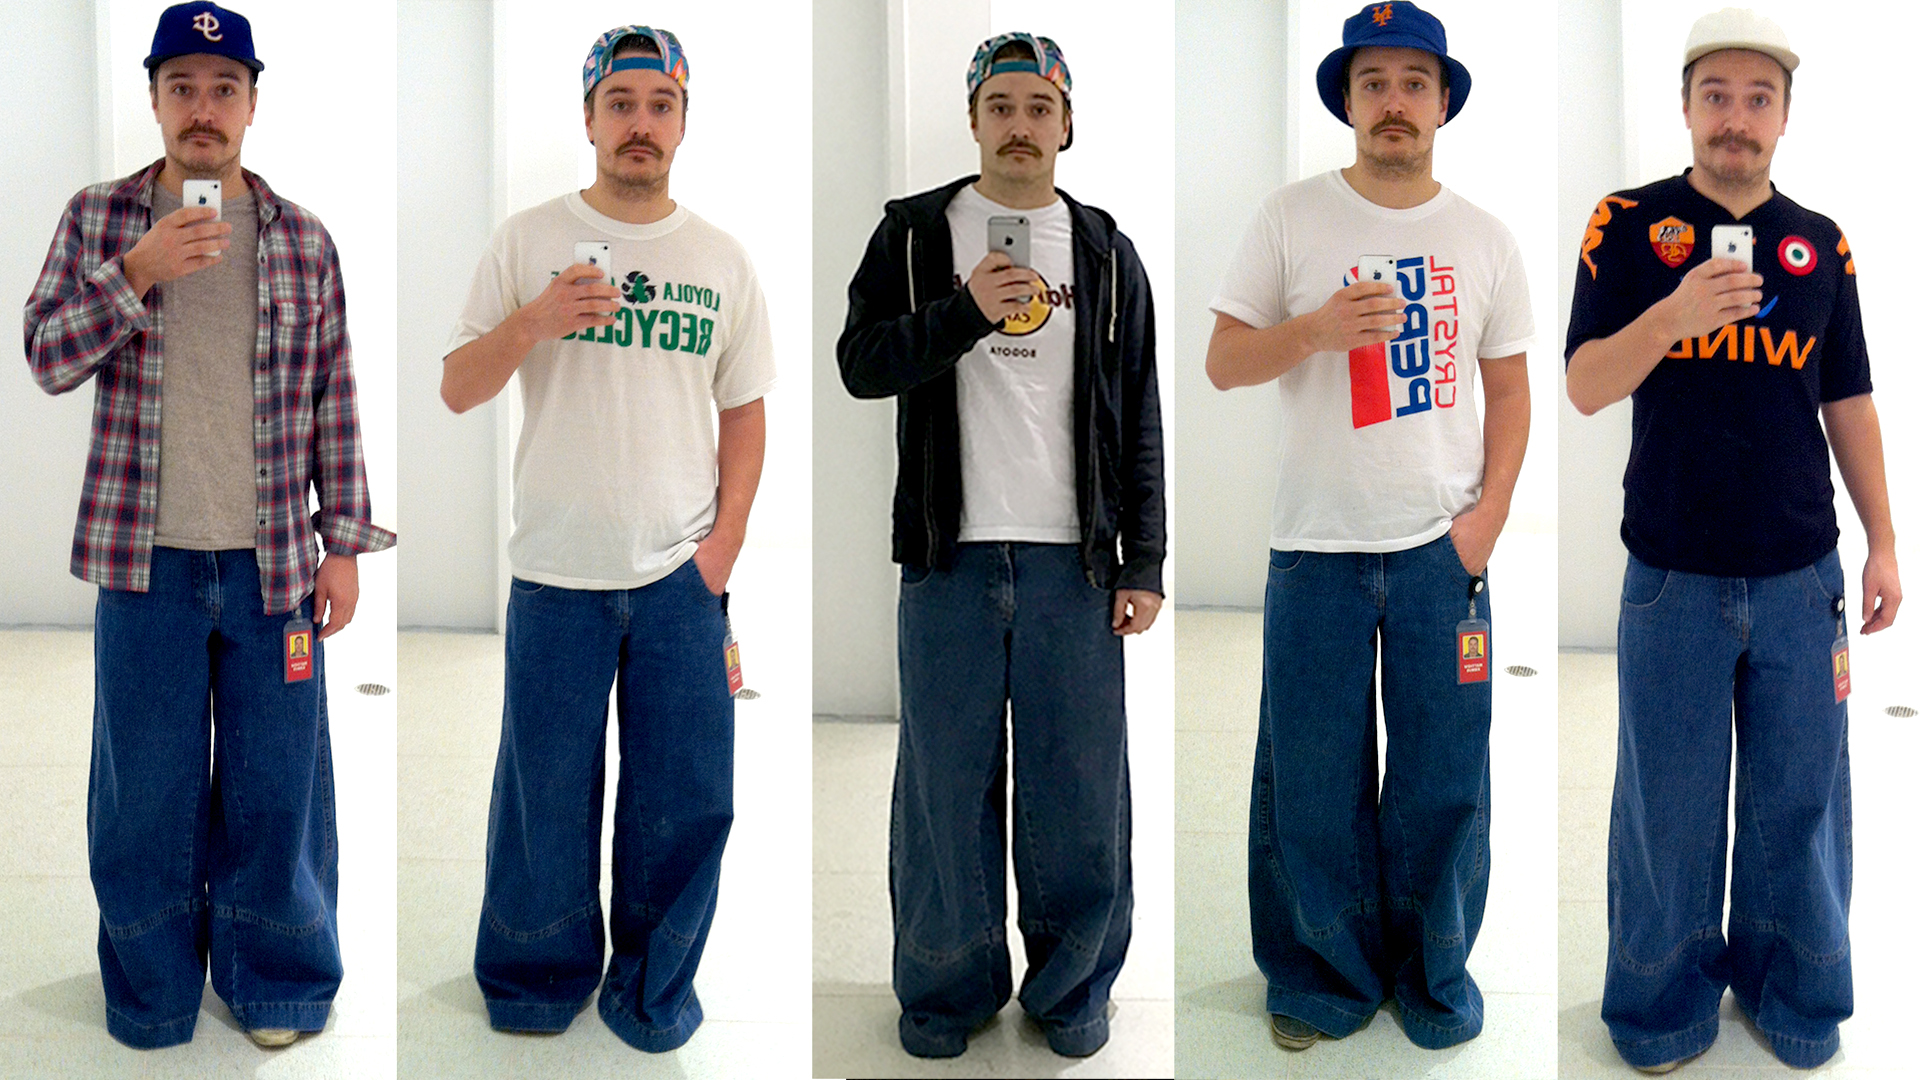 Jnco Characters